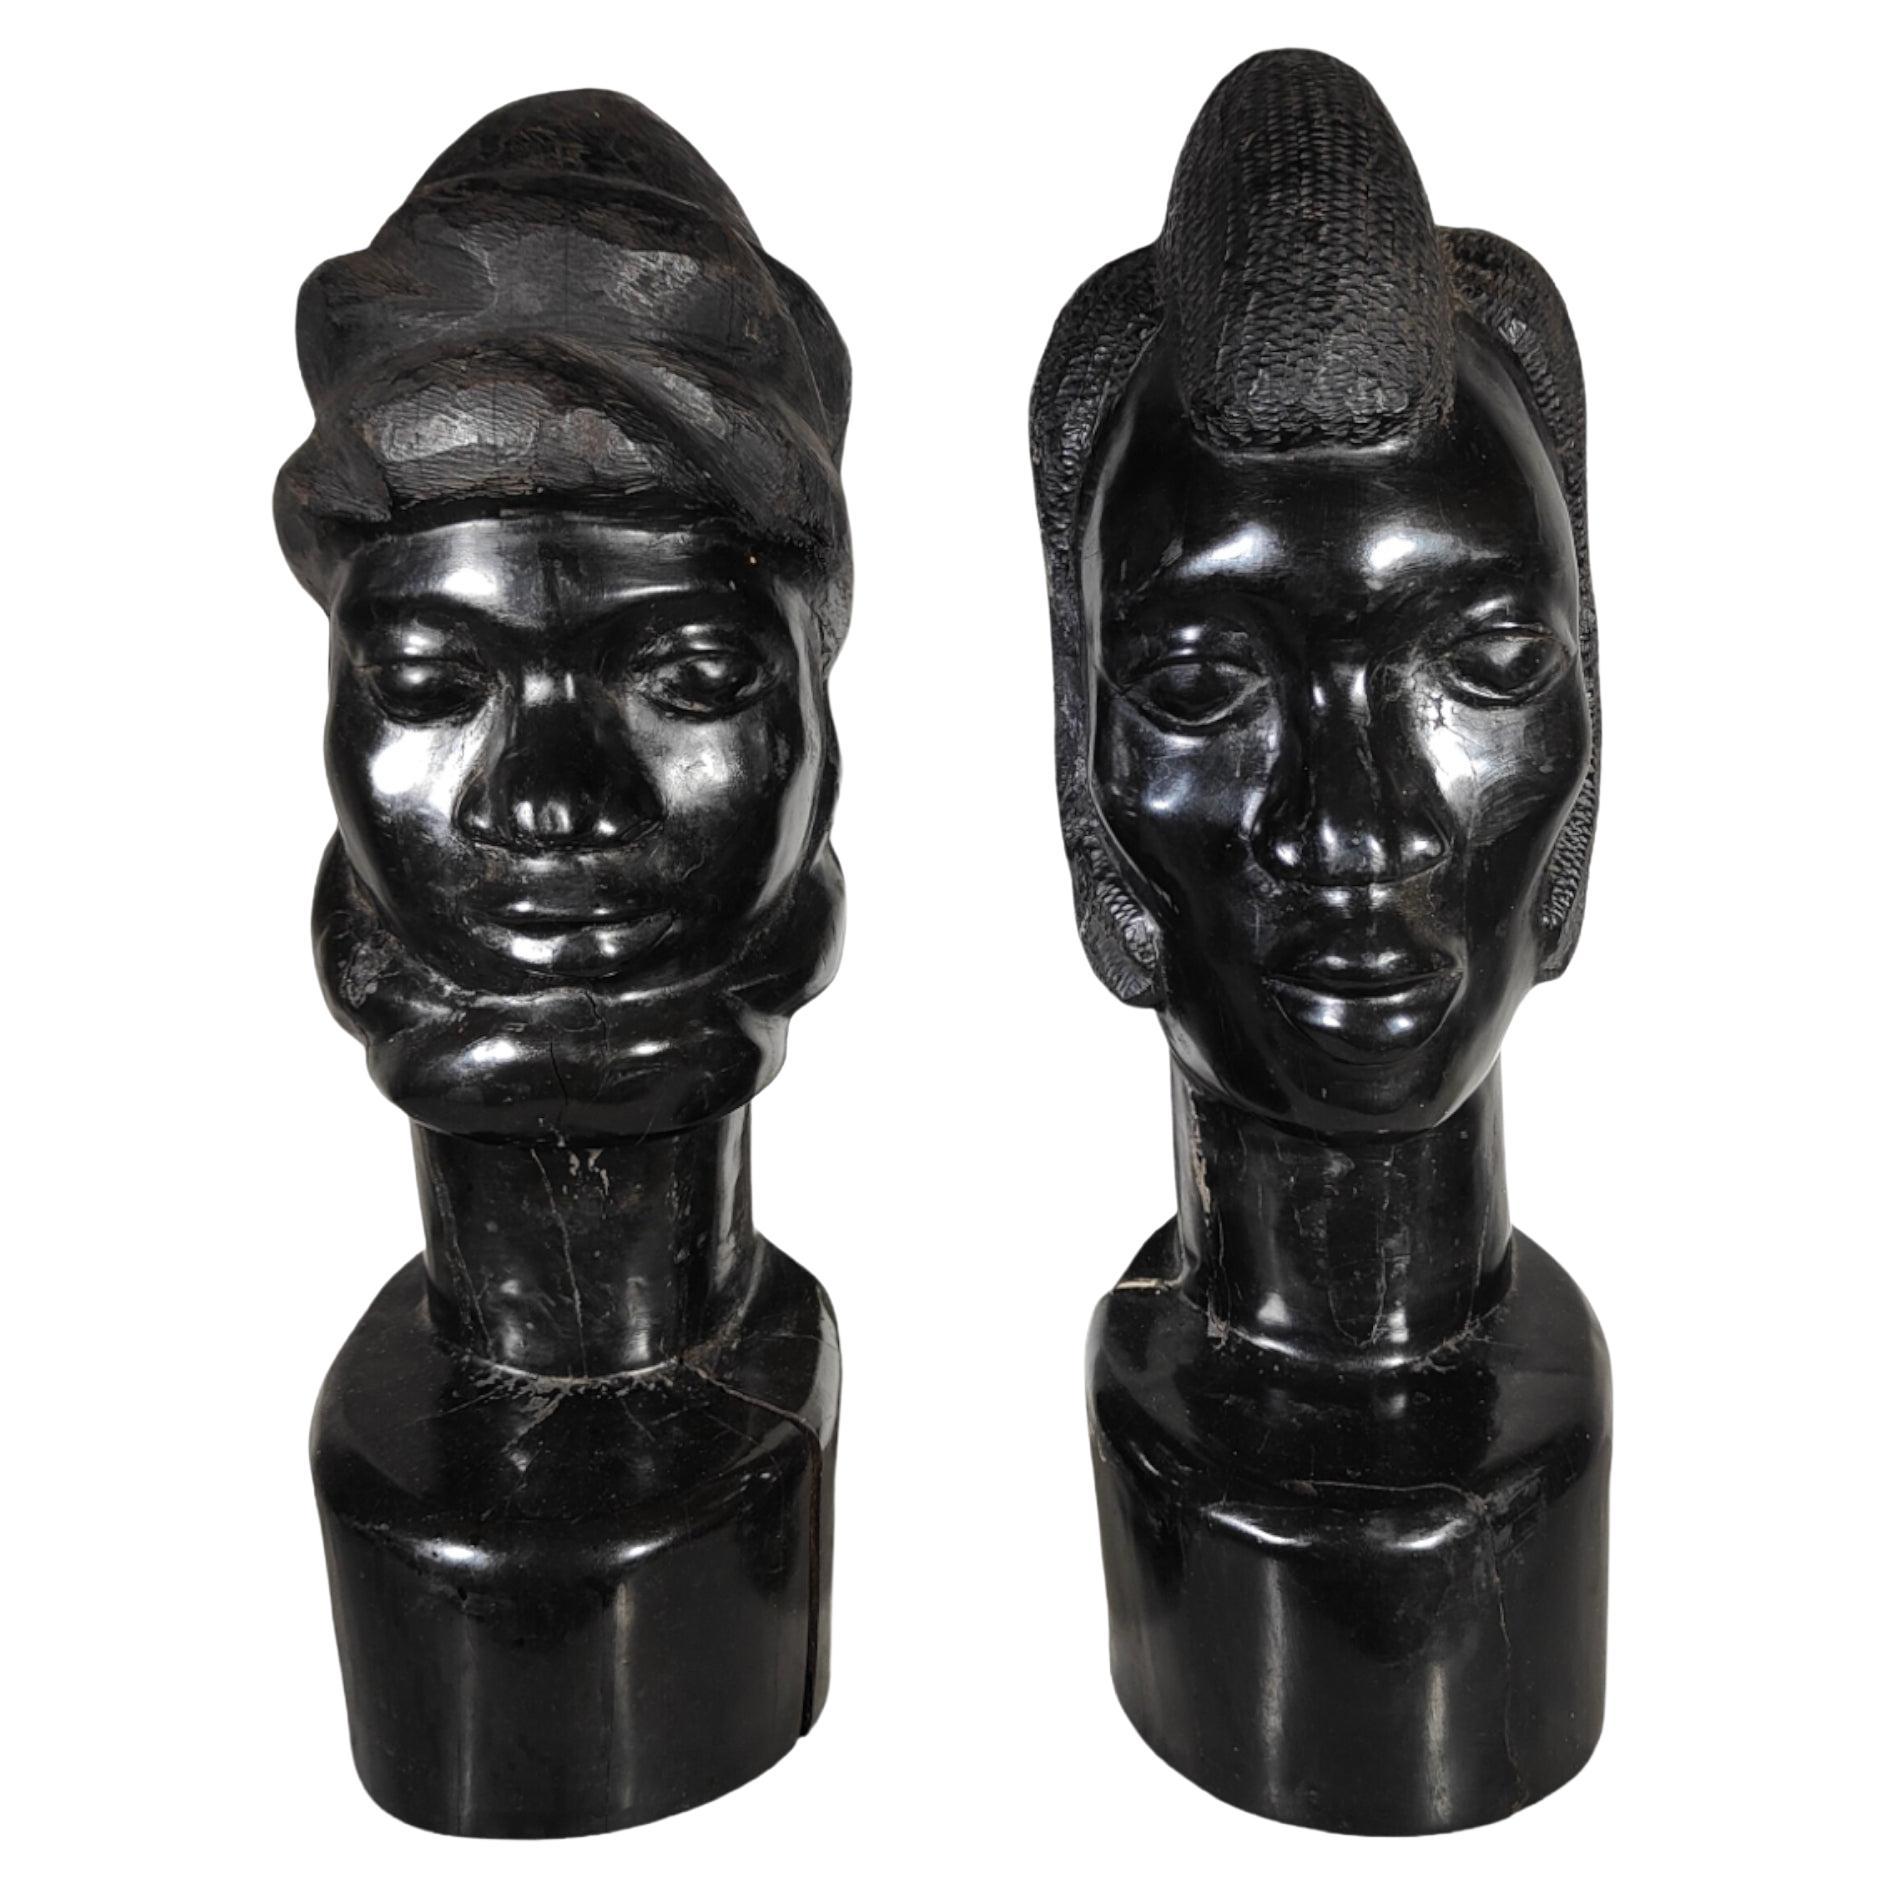 What wood is used for African carvings?